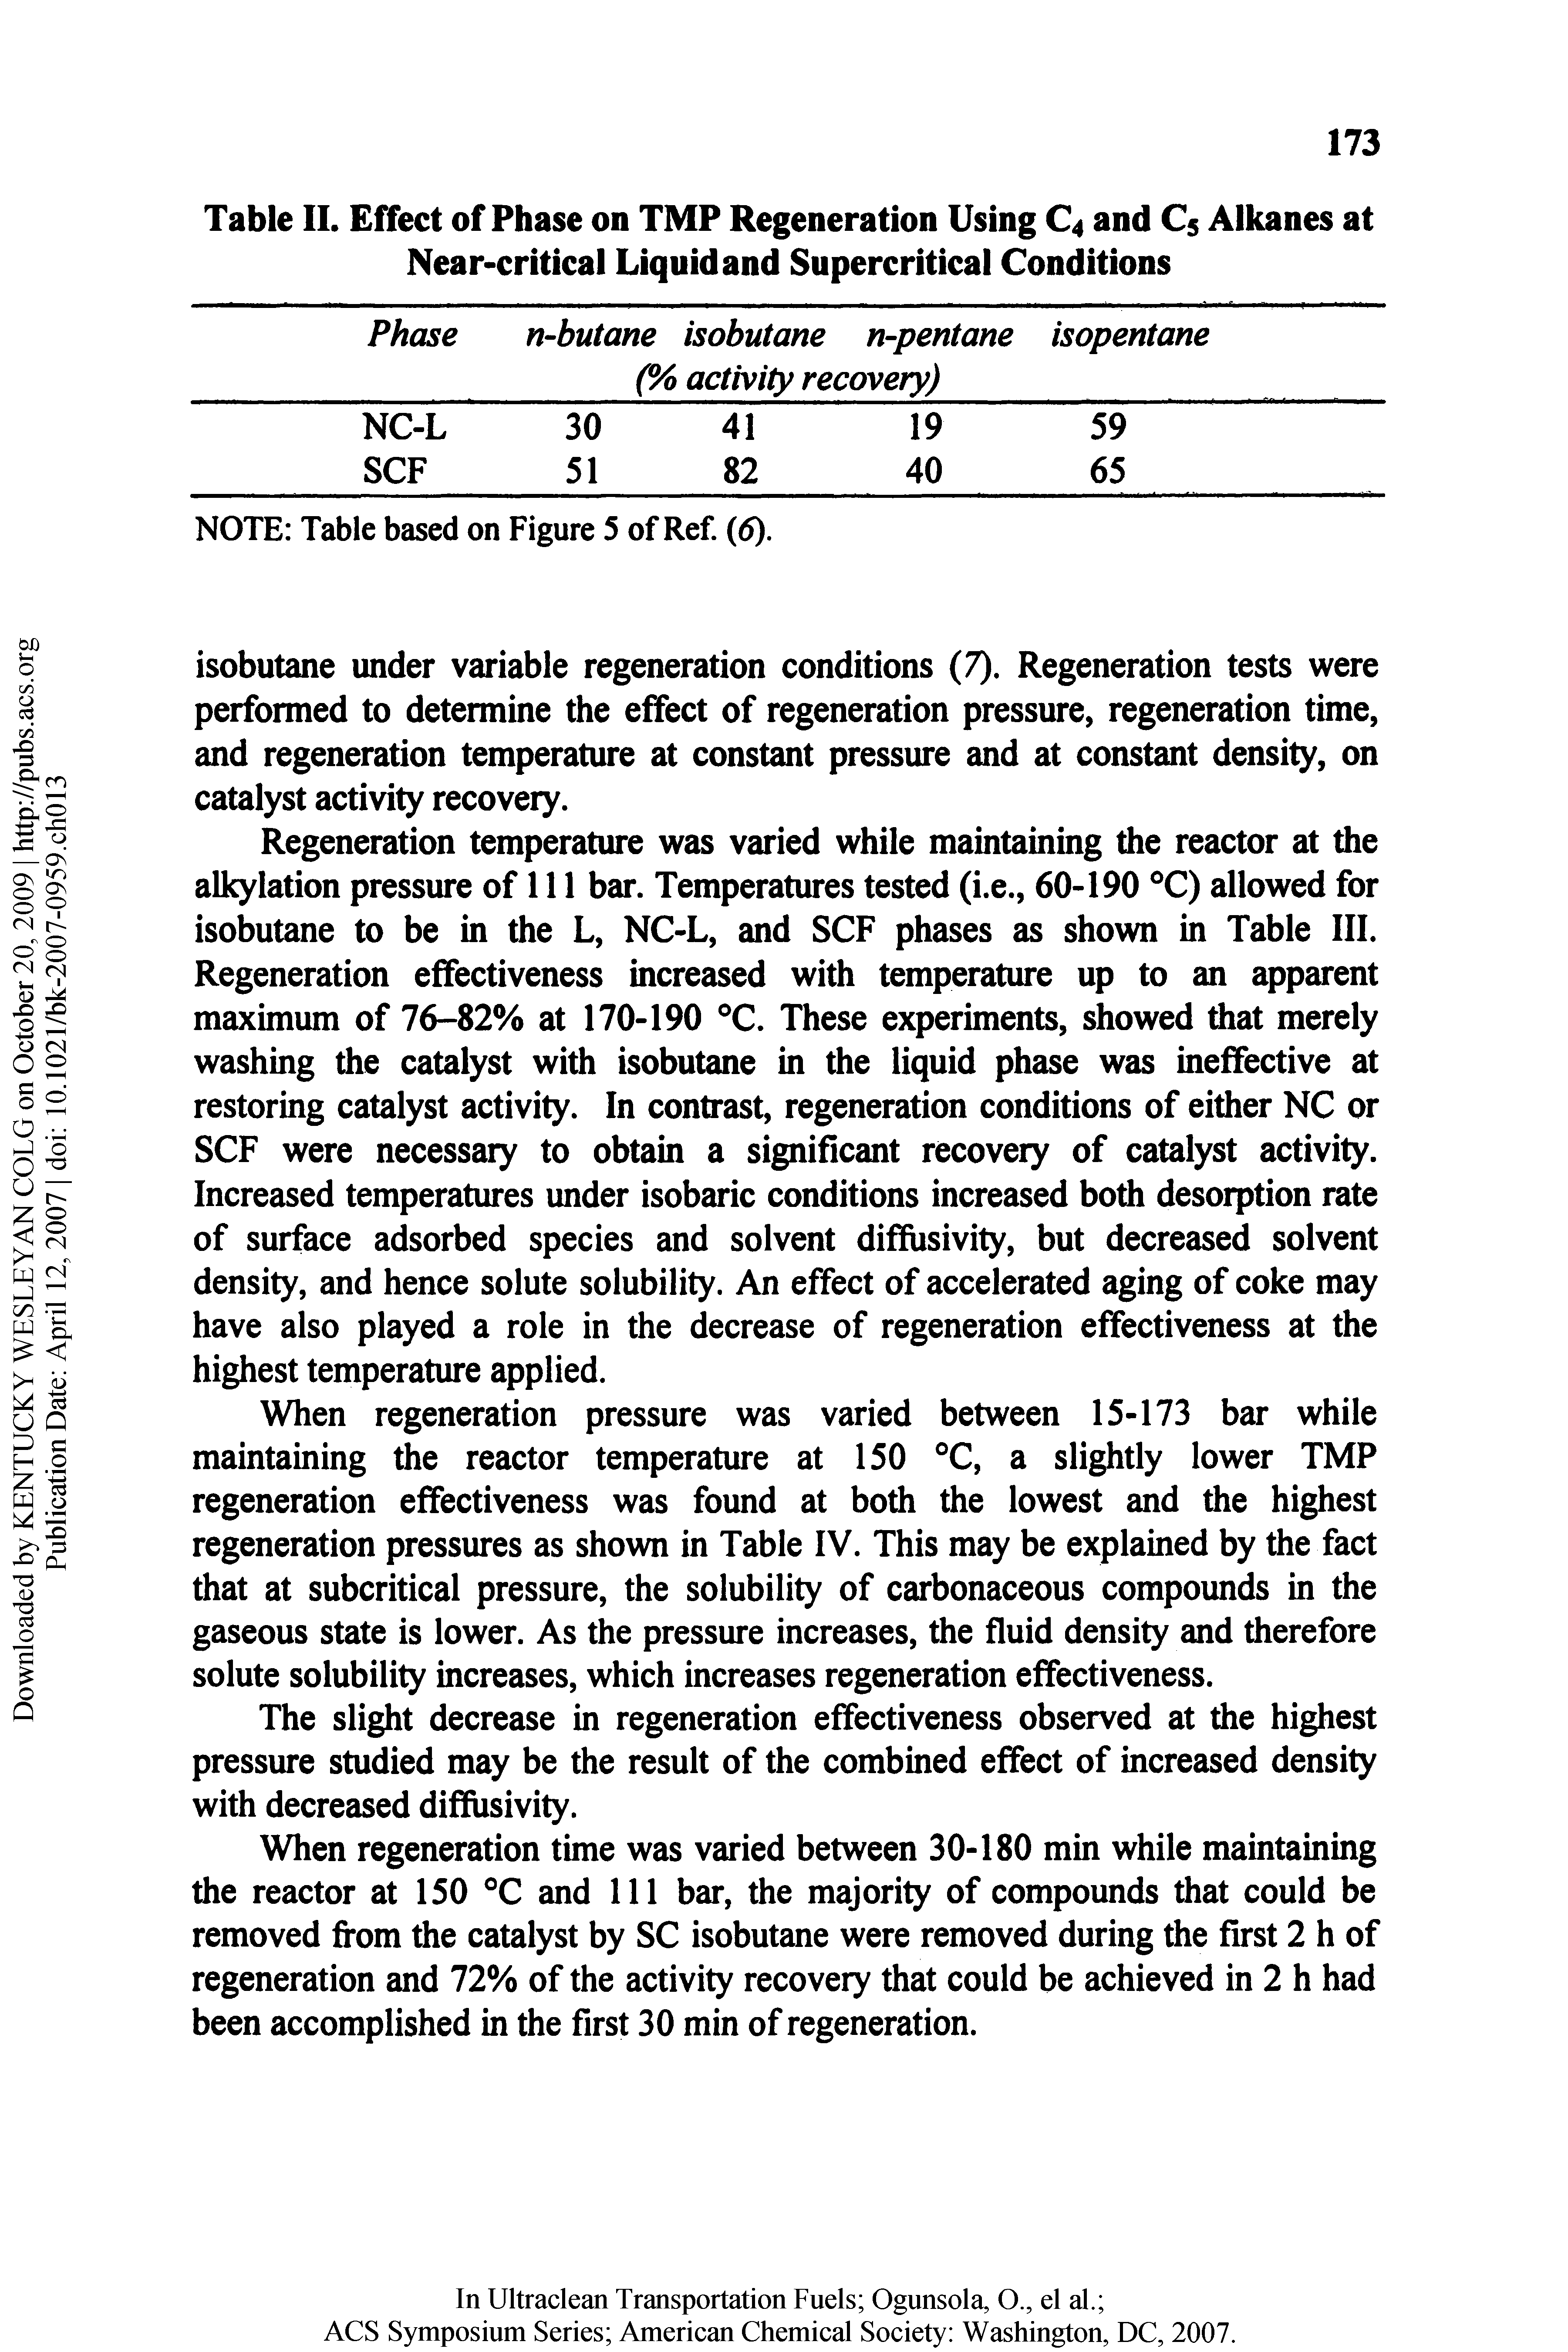 Table IL Effect of Phase on TMP Regeneration Using C4 and C5 Alkanes at Near-critical Liquid and Supercritical Conditions...